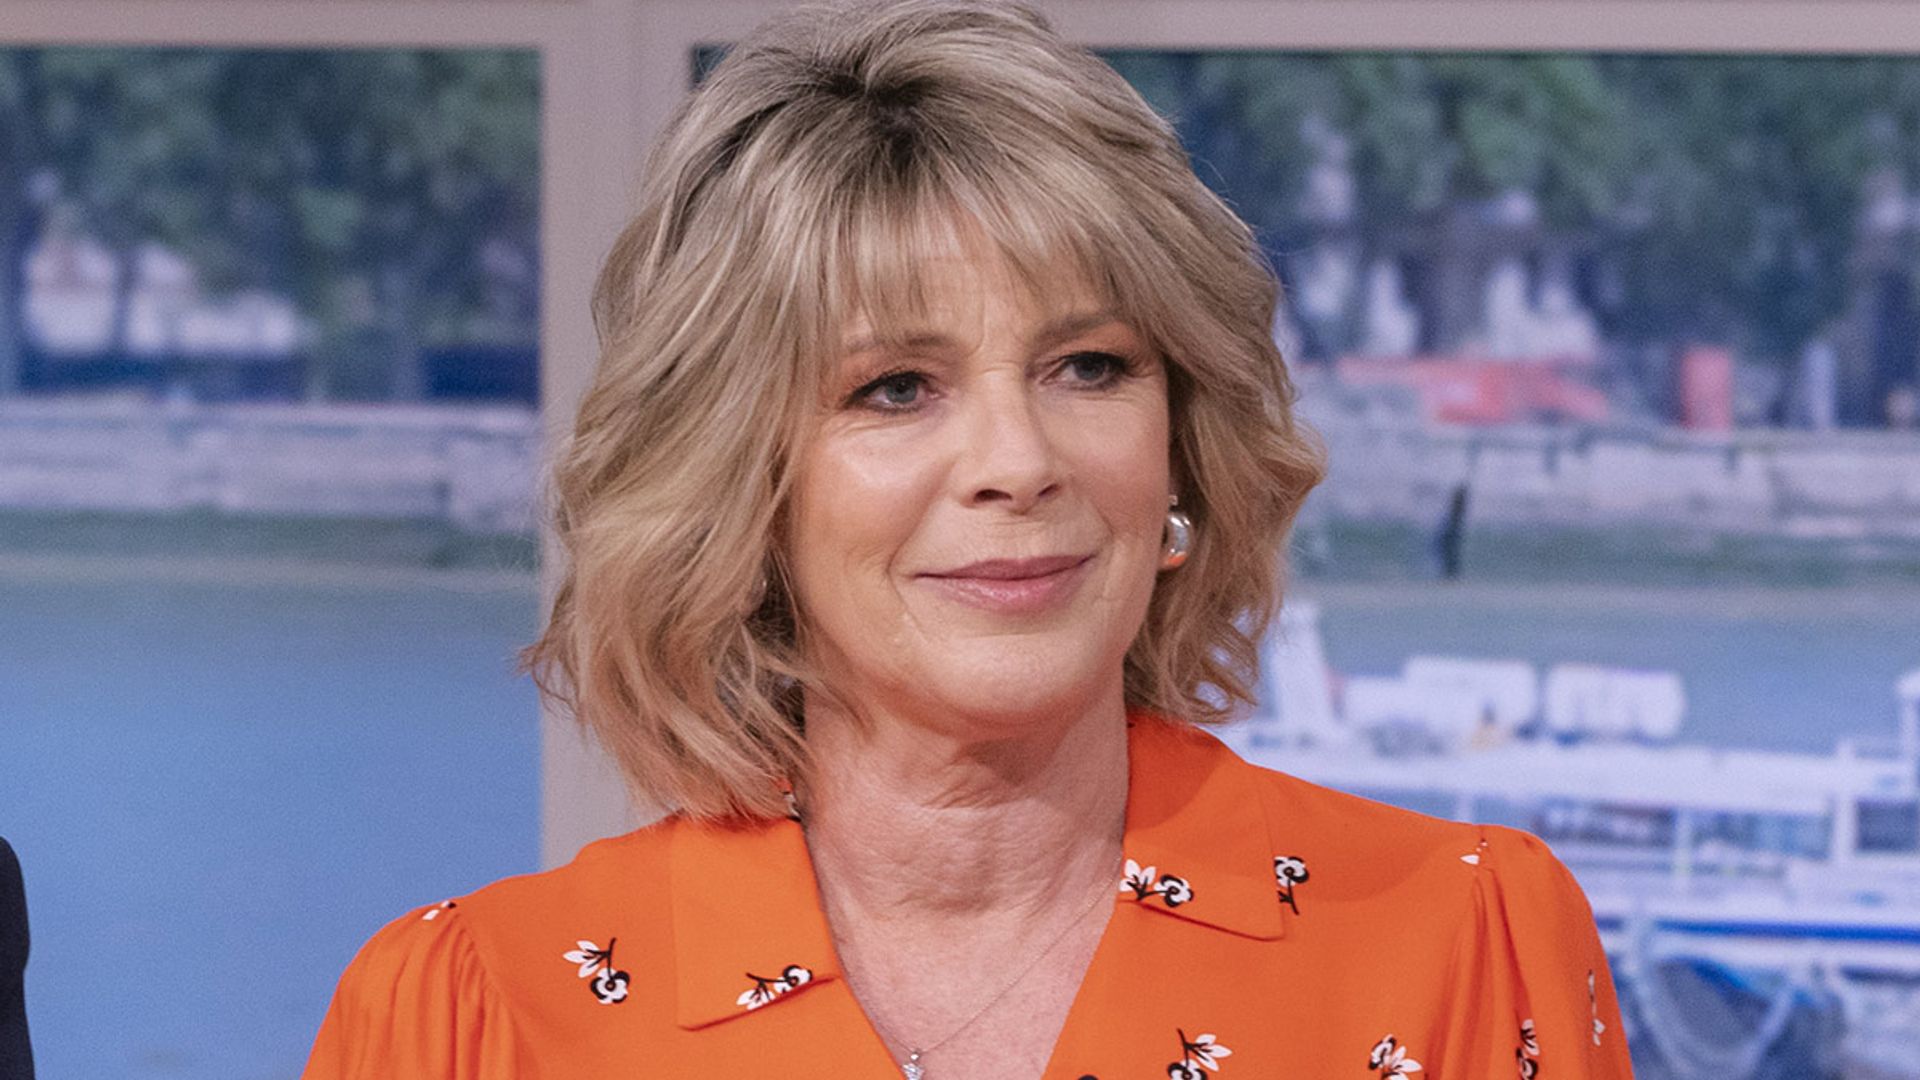 Ruth Langsford's flattering yellow top is on sale at Debenhams for £14.50